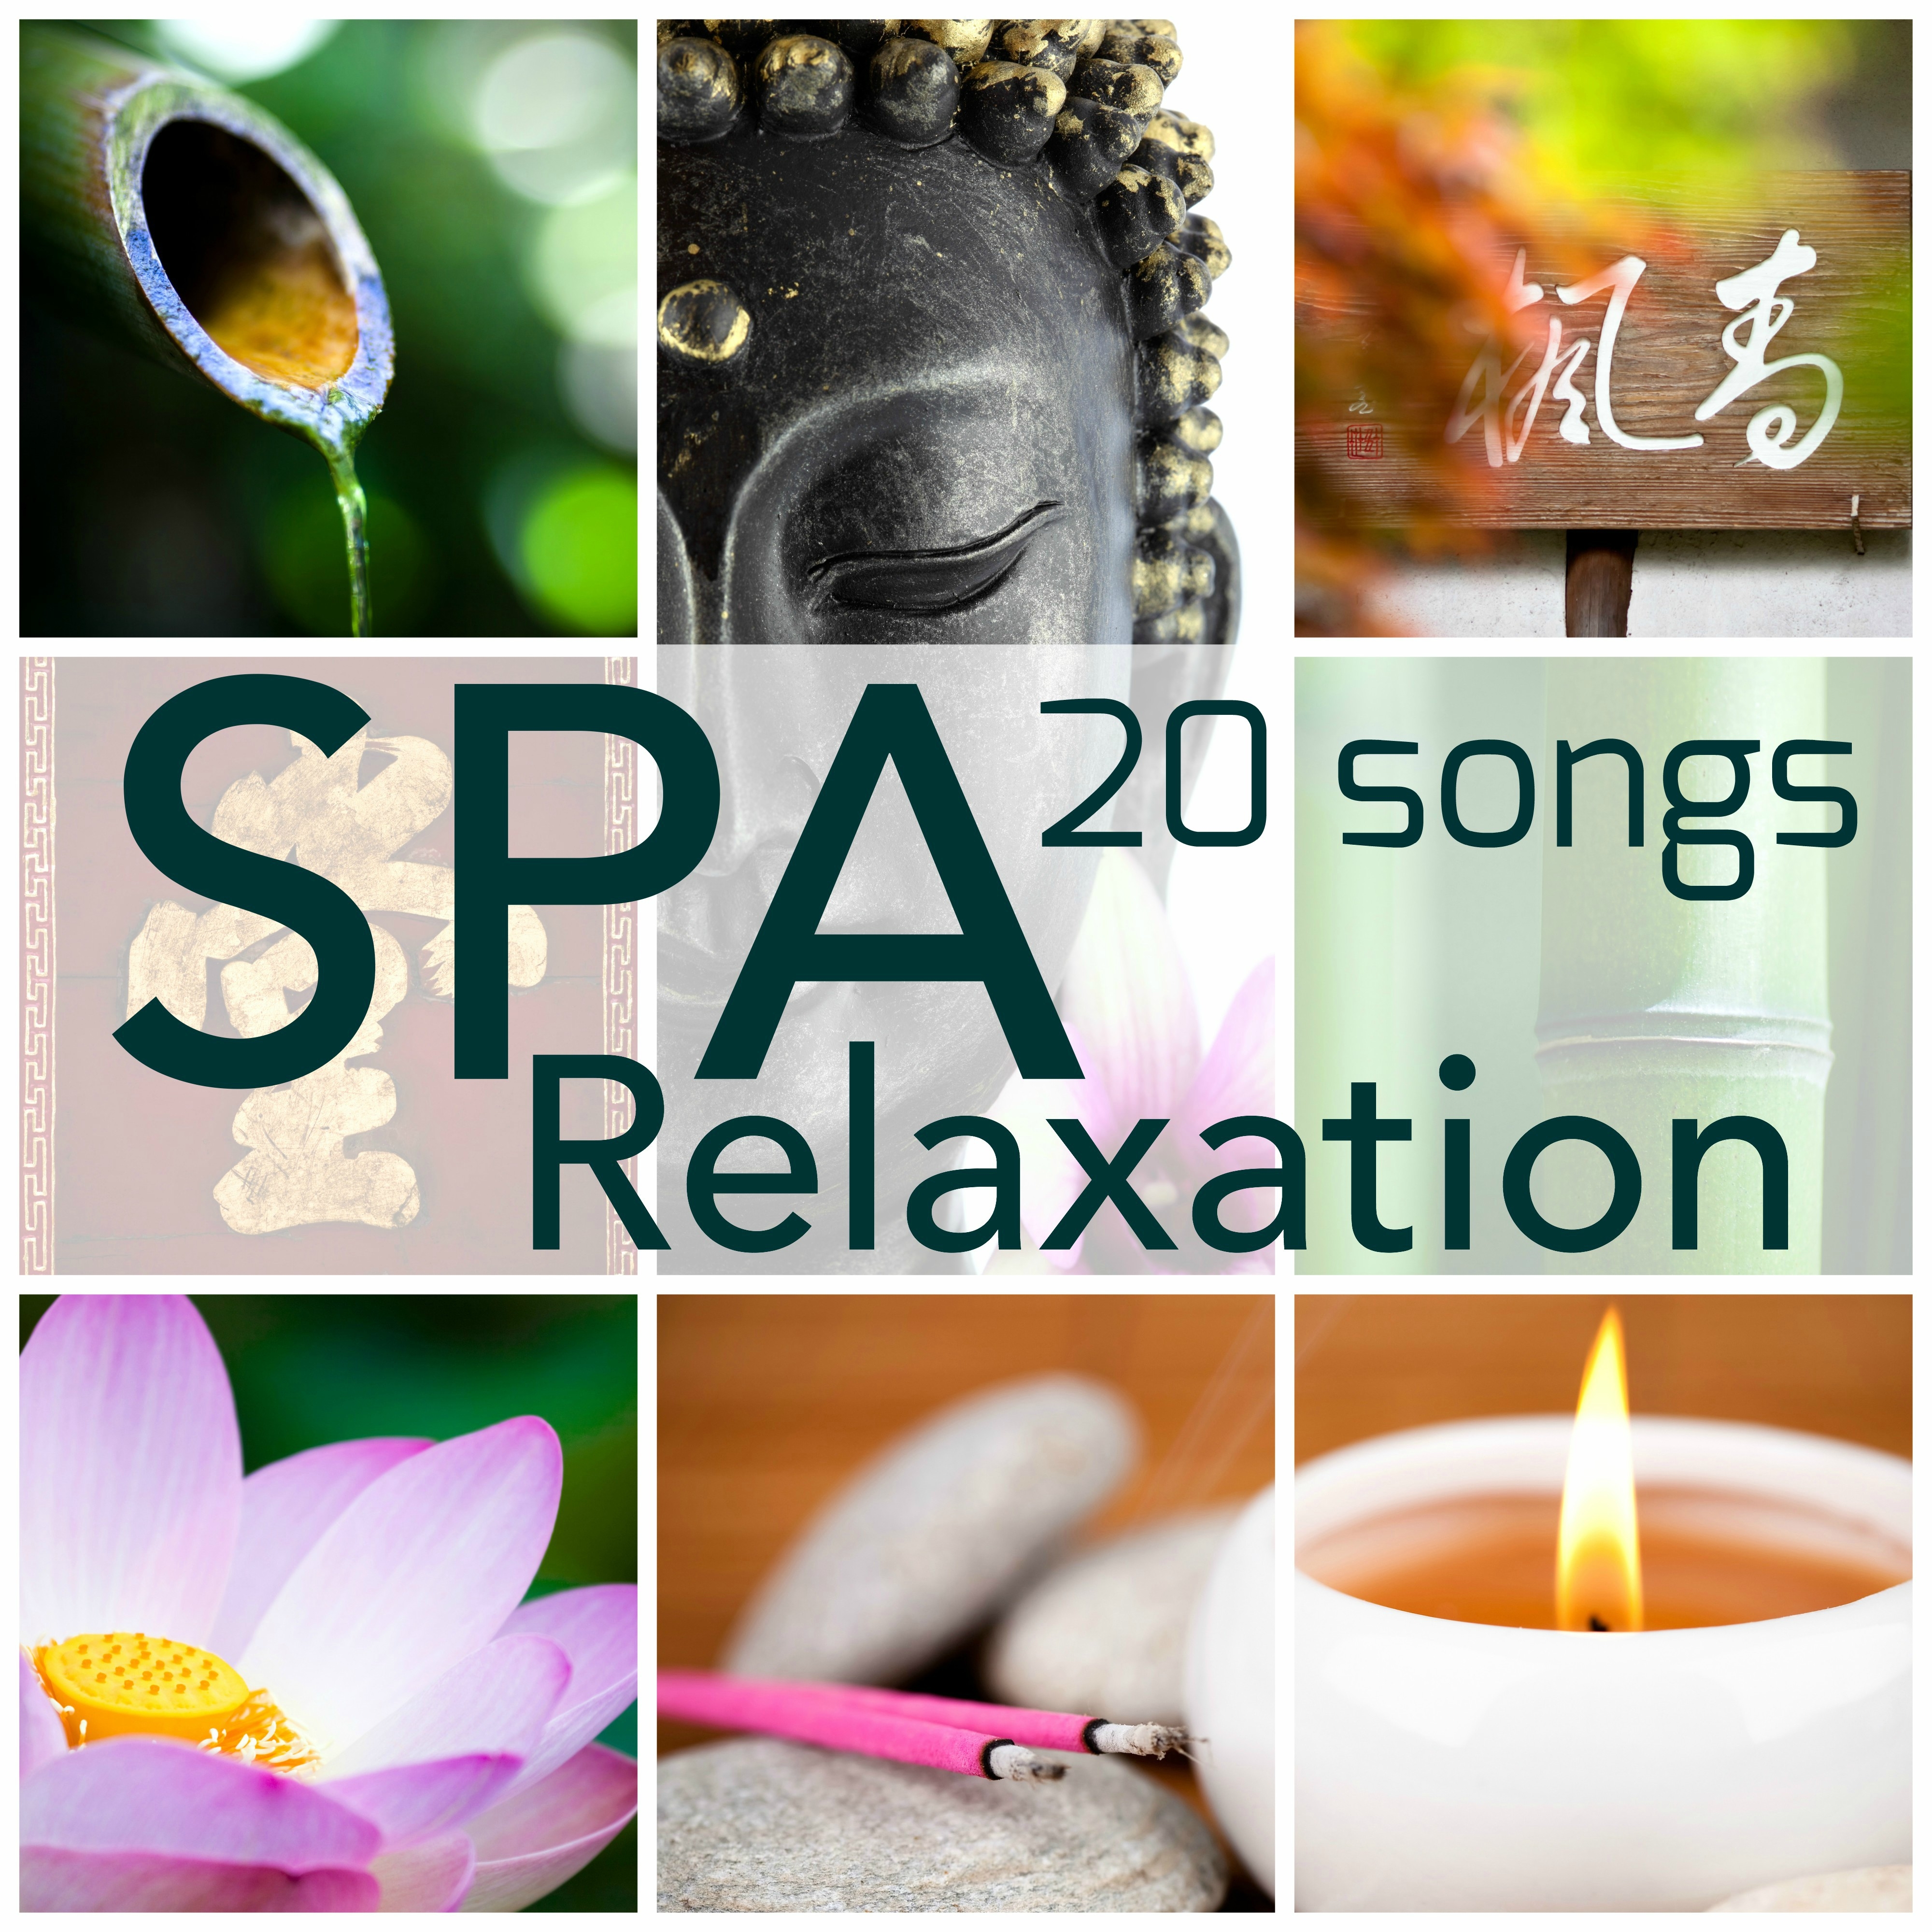 Spa Relaxation 20 Songs - Perfect Playlist for Deep Sensual Massage, Face Mask and Relaxing Spa Treatments, Chillout Background for Sauna, Hammam, Yoga, Meditation and Essential Oils Aromatherapy